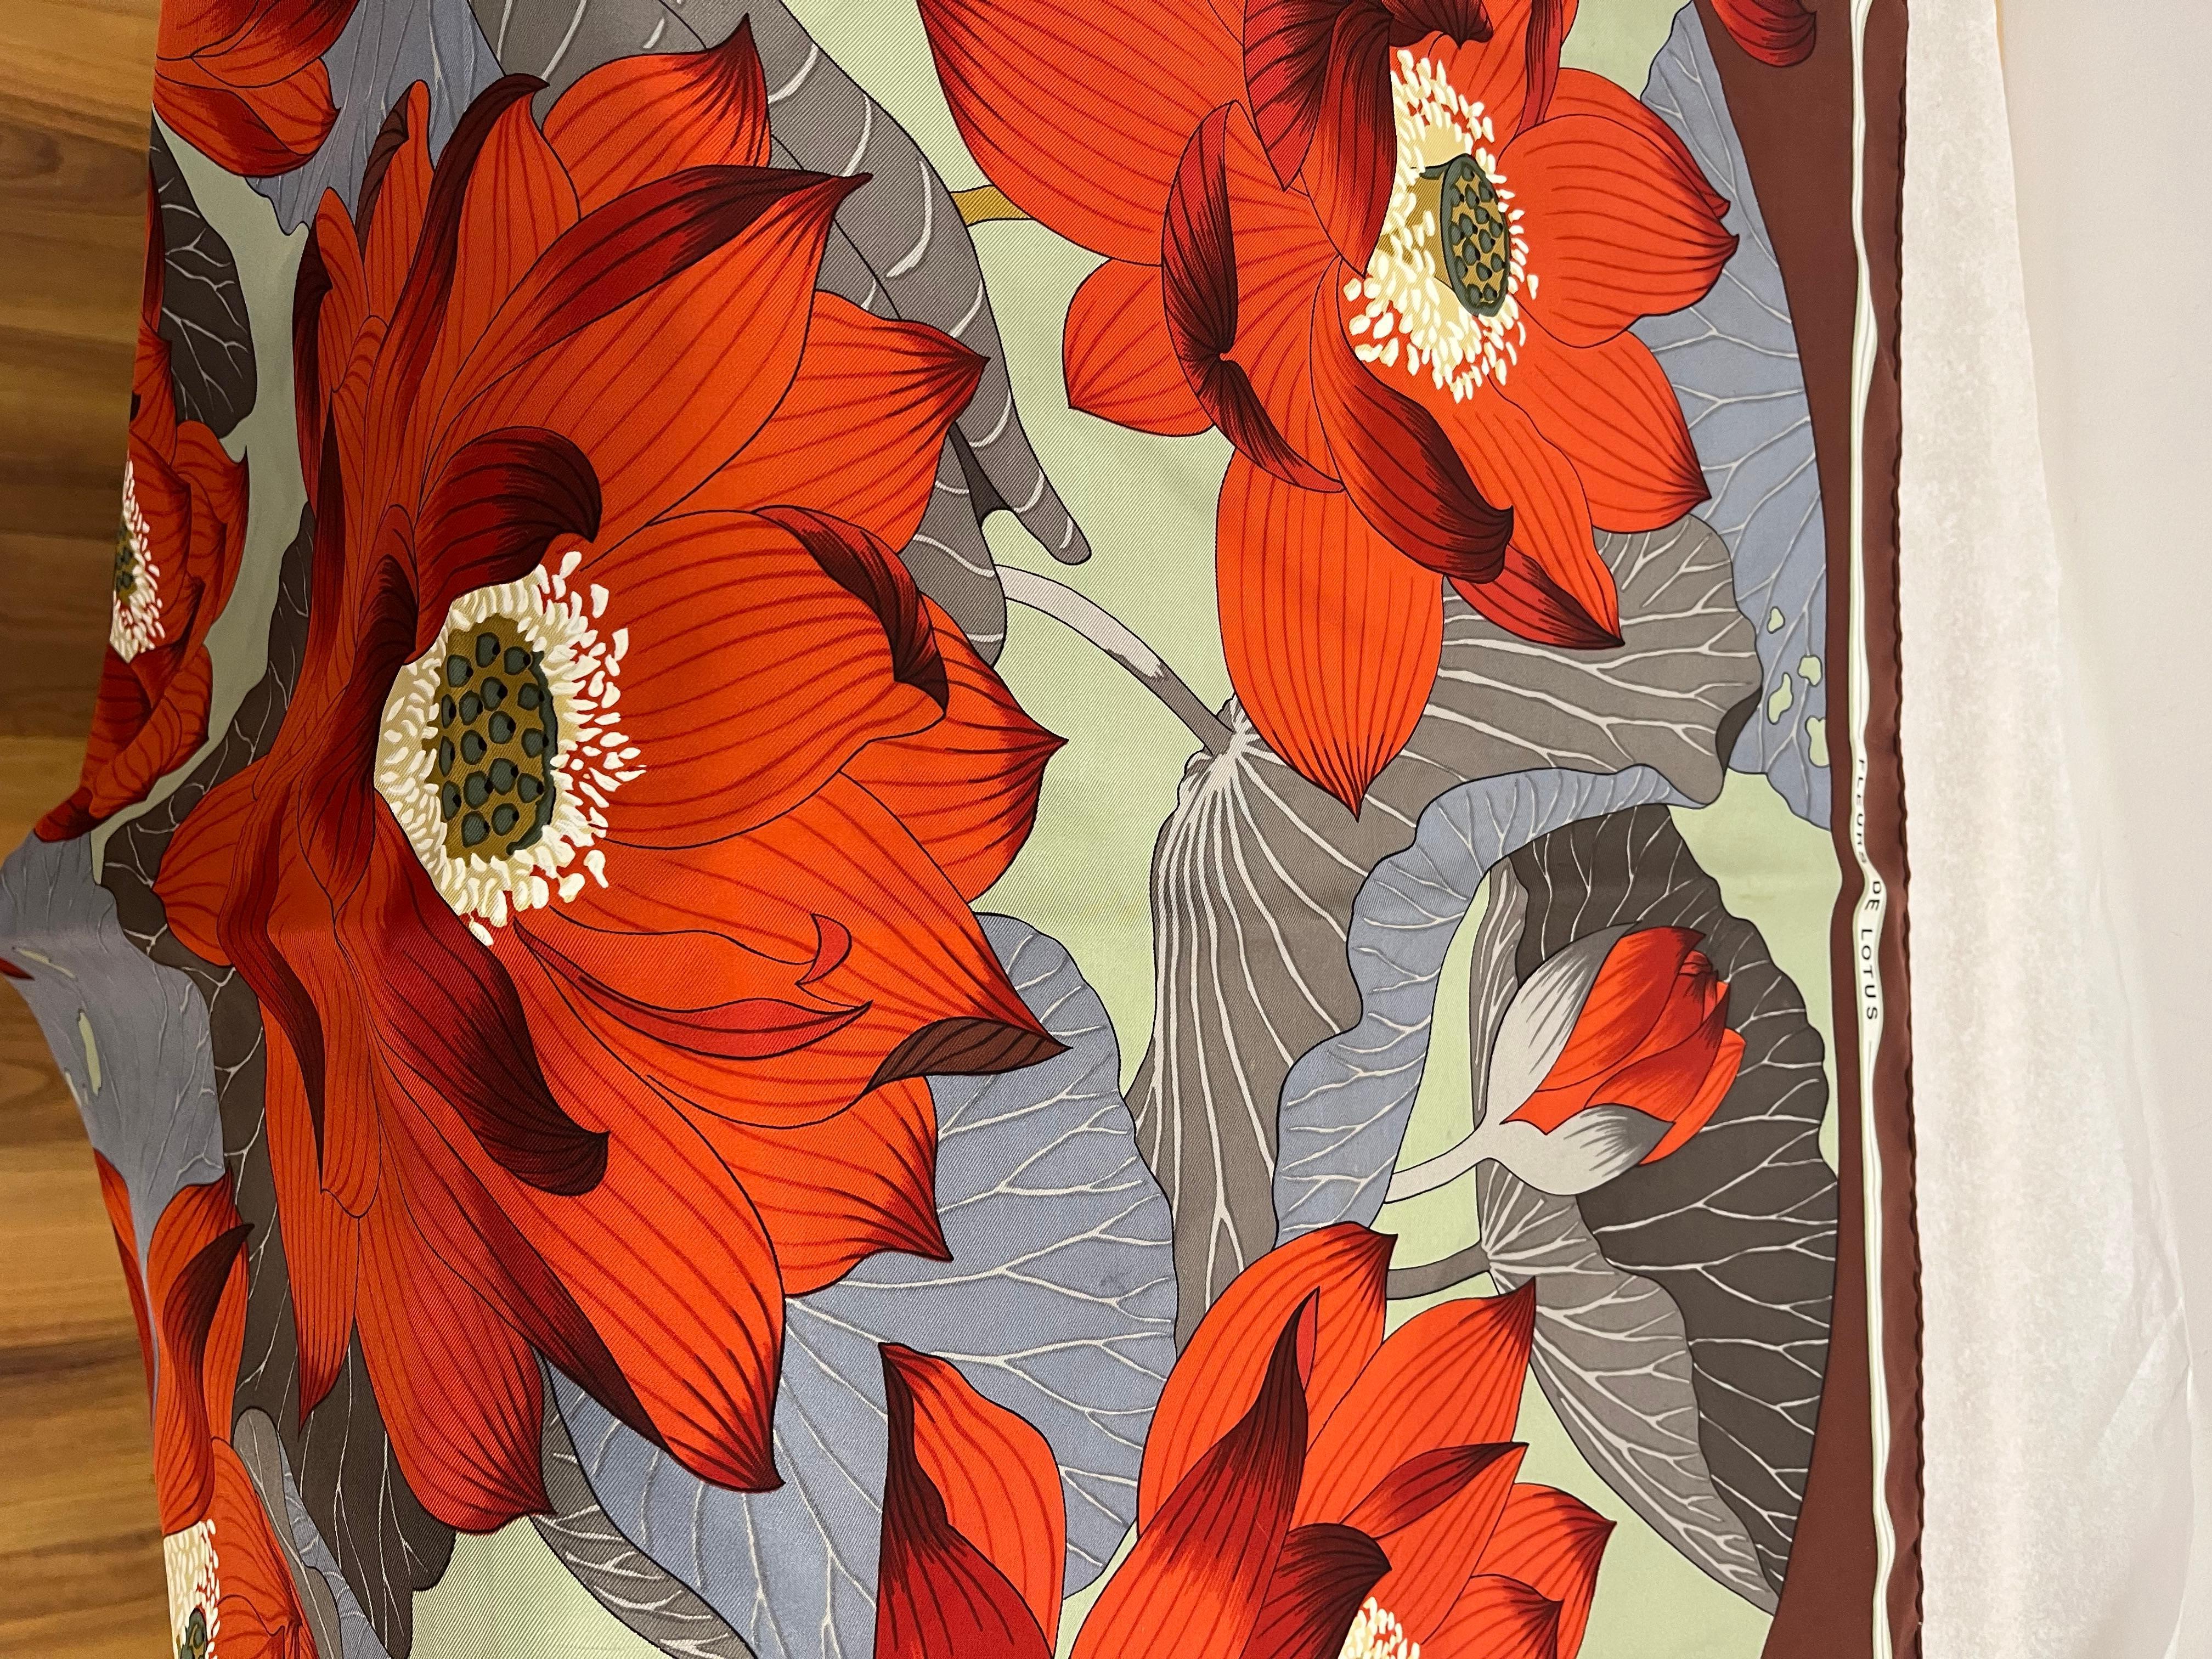 Stunning and colorful Hermes silk scarf designed by Christiane Vauzelles, featuring the lotus flower and greenery. The scarf is shown worn as a head scarf, but can also be rolled on your bag handle, and of course worn around the neck.

The hems are